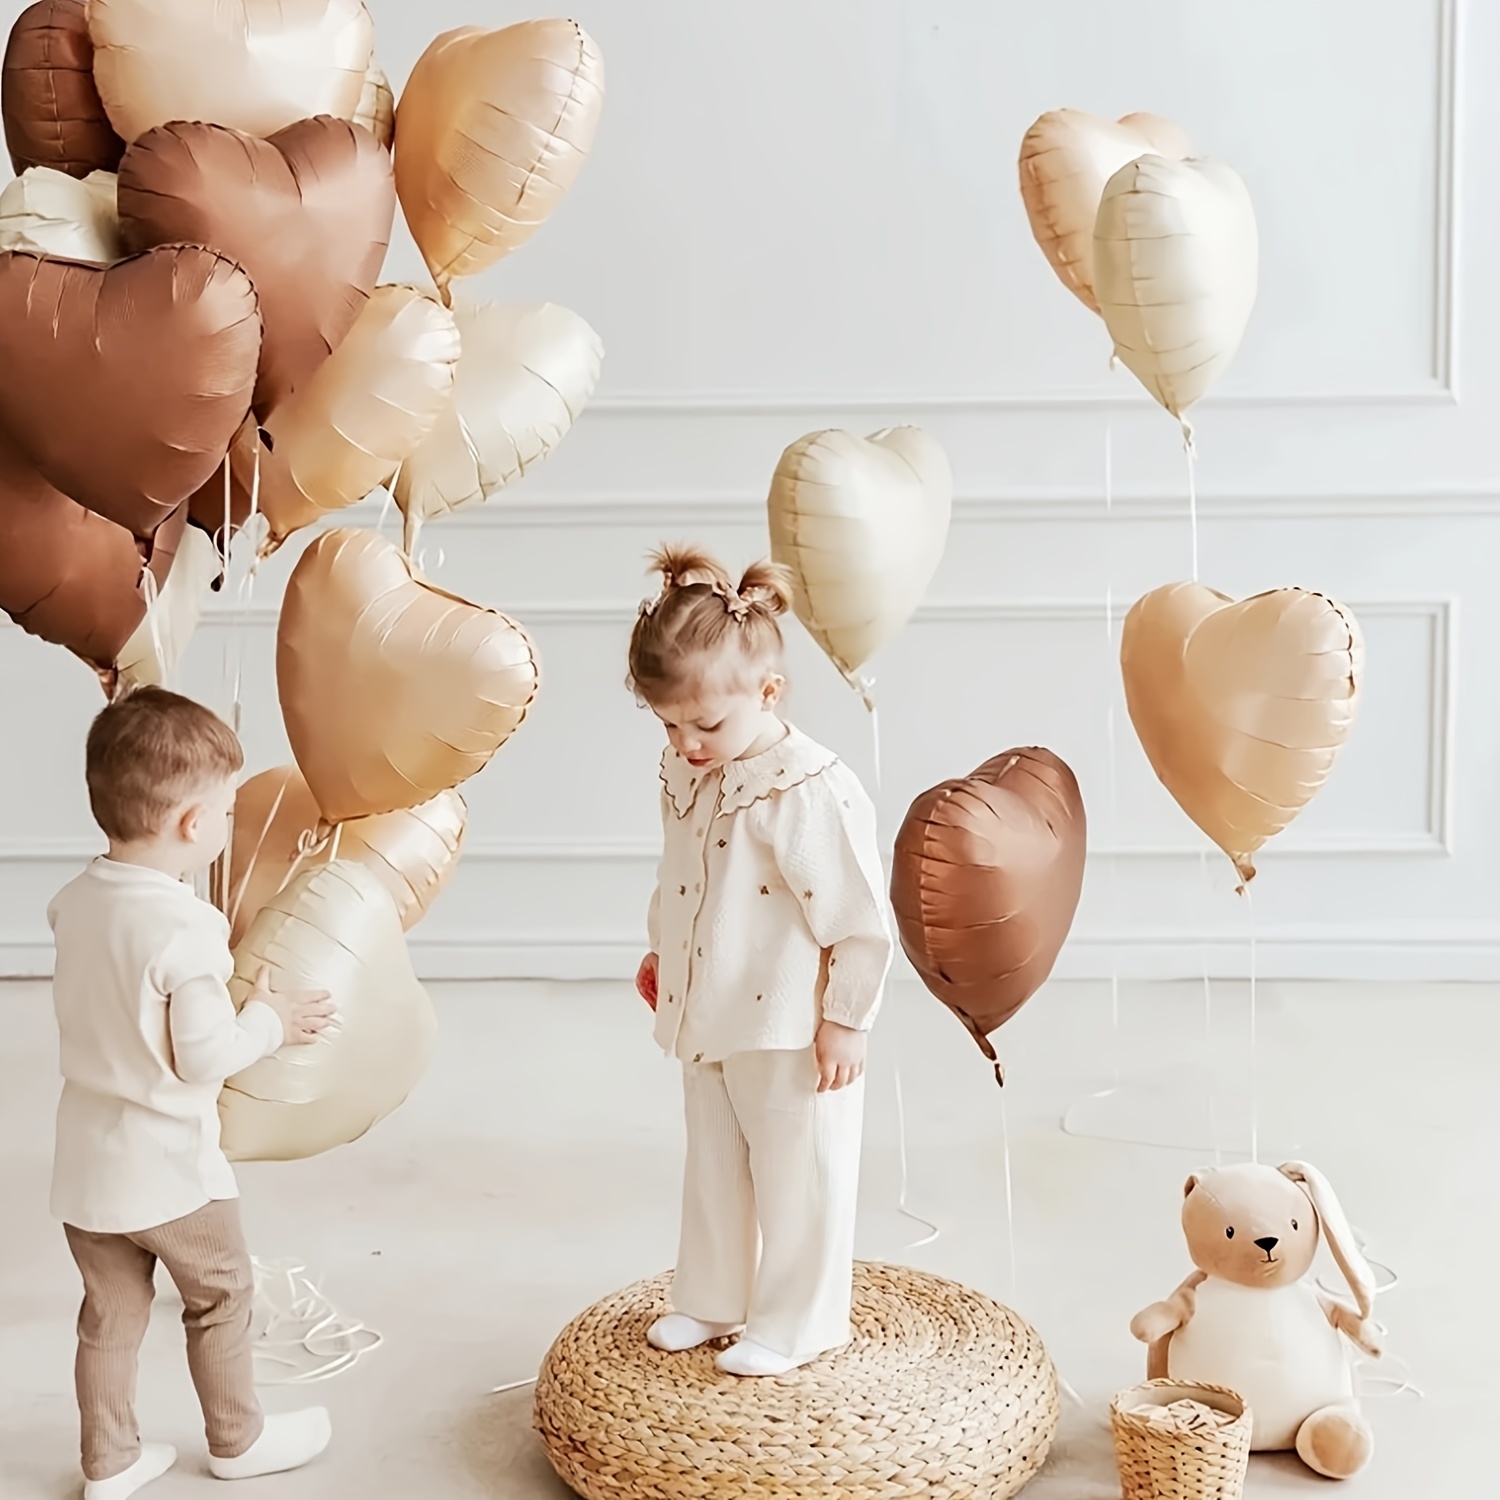 

elegant" 18-inch Heart-shaped Foil Balloons In Brown, Apricot & Cream - Perfect For Valentine's Day, Engagements, Birthdays, Baby Showers & Weddings